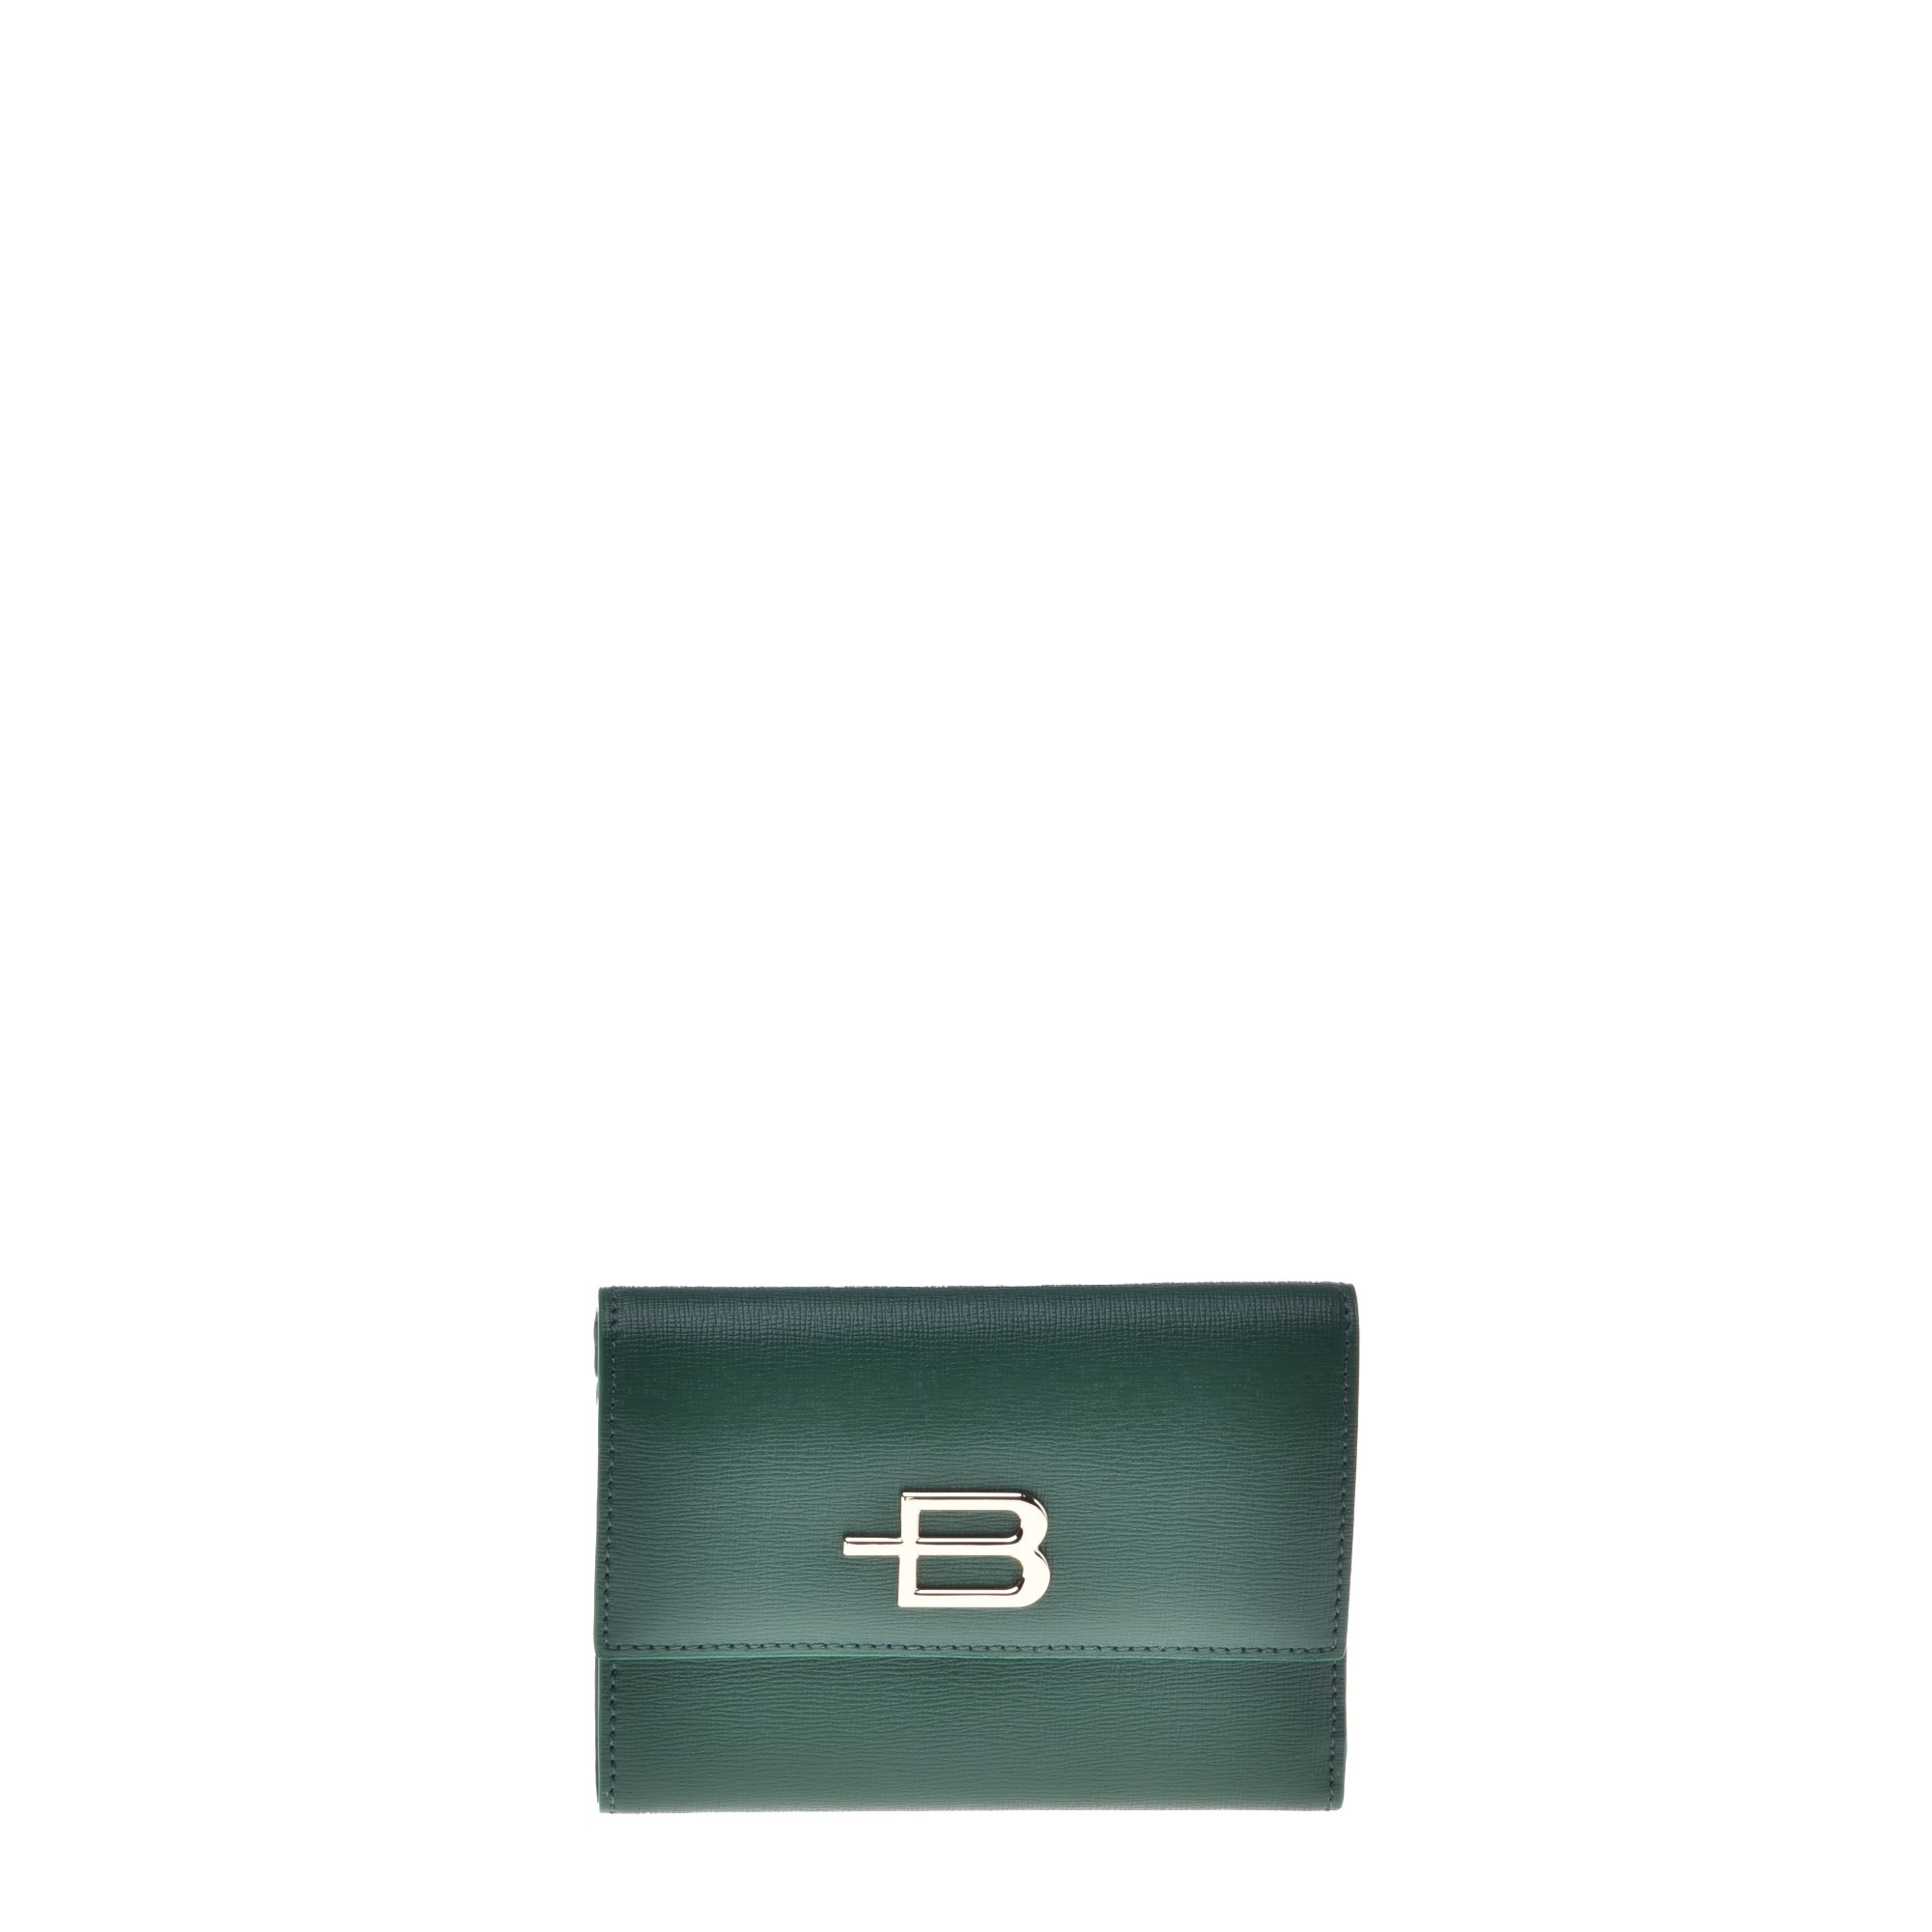 Wallet in green saffiano image